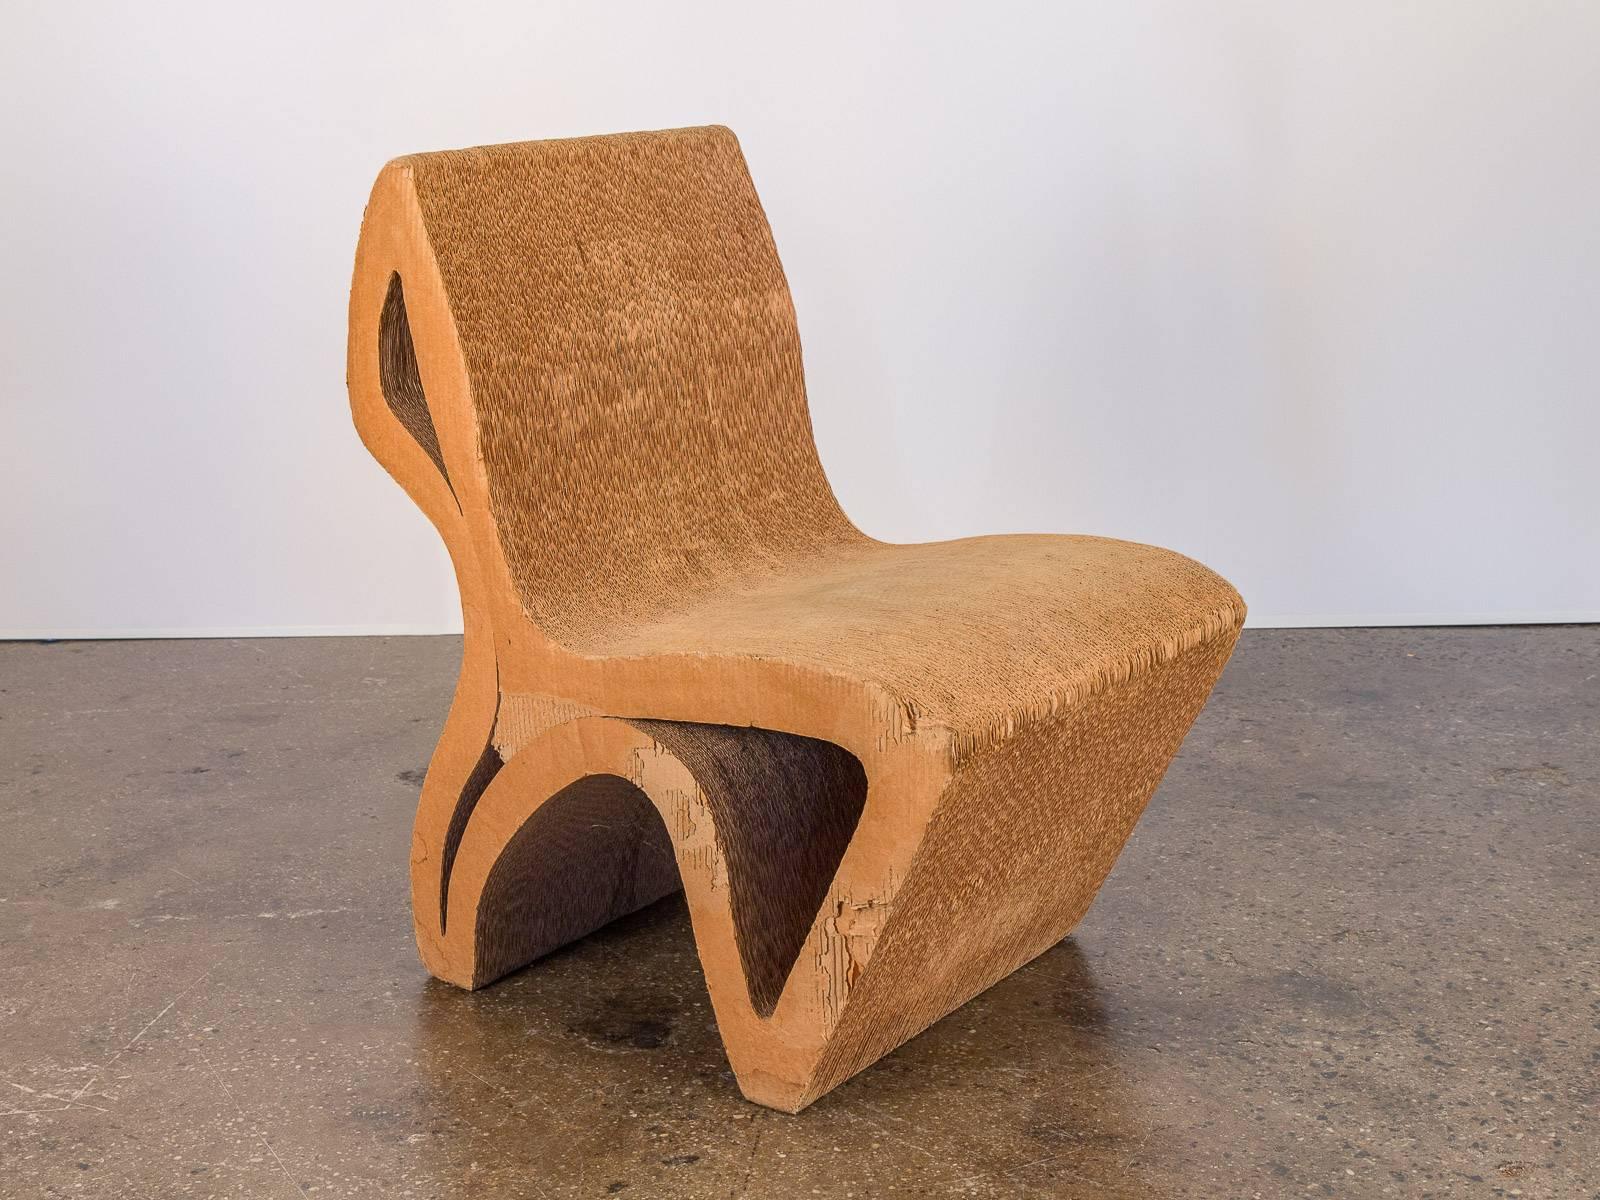 Unique, one-off vintage corrugated cardboard chair. Reminiscent of Frank Gehry’s cardboard Wiggle chair, this minimal design follows a sequential contour that demonstrates an intriguing profile at all angles. While worn, this chair is surprisingly